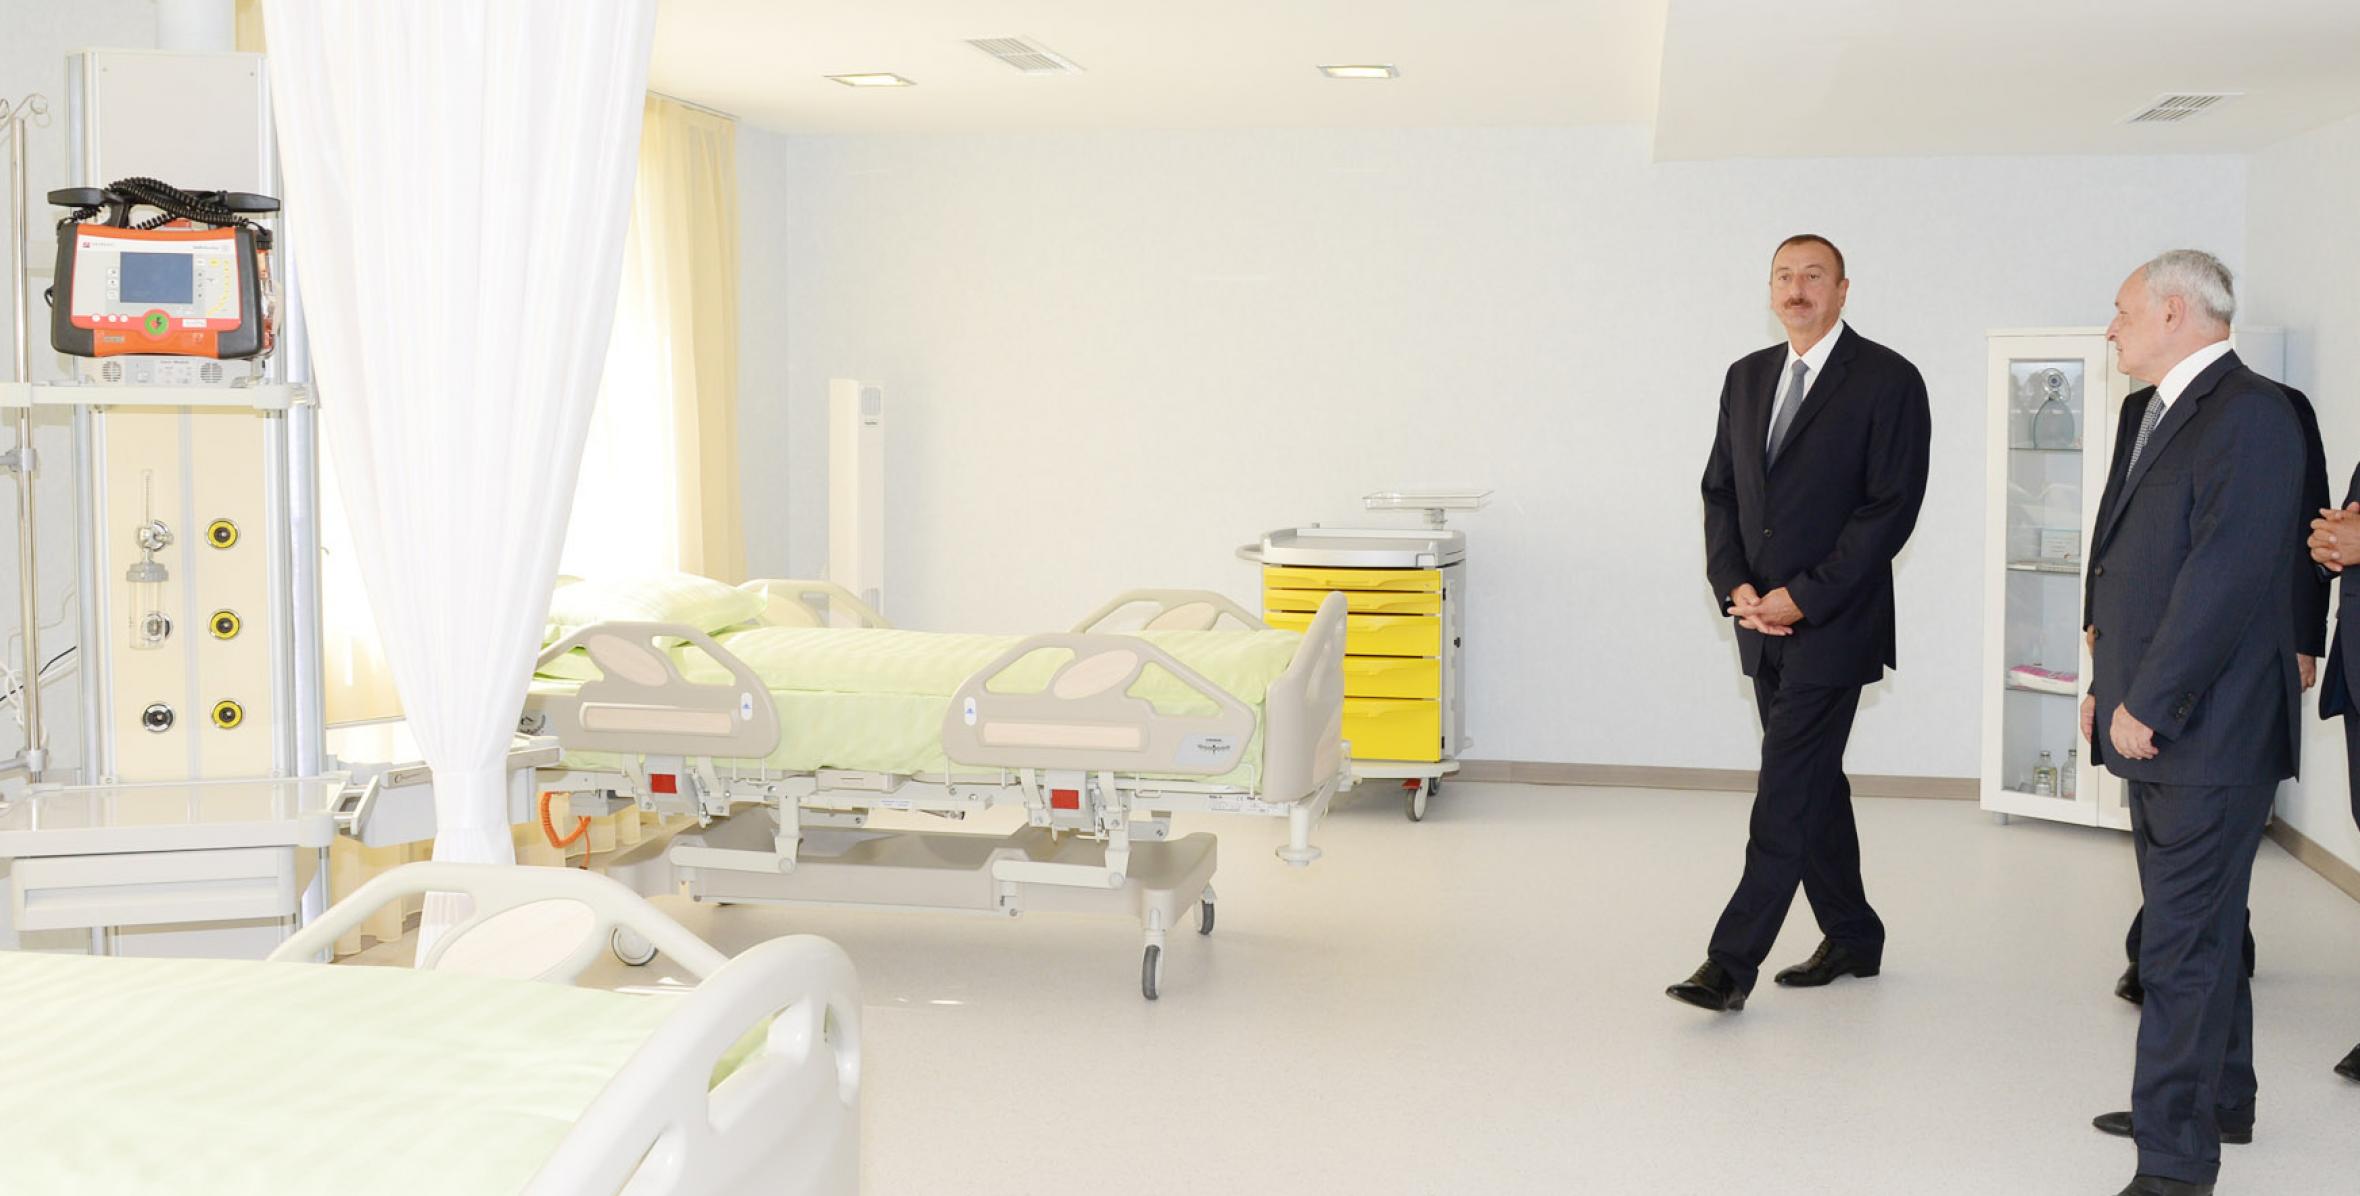 Ilham Aliyev reviewed the reconstruction of the Lankaran City Central Hospital